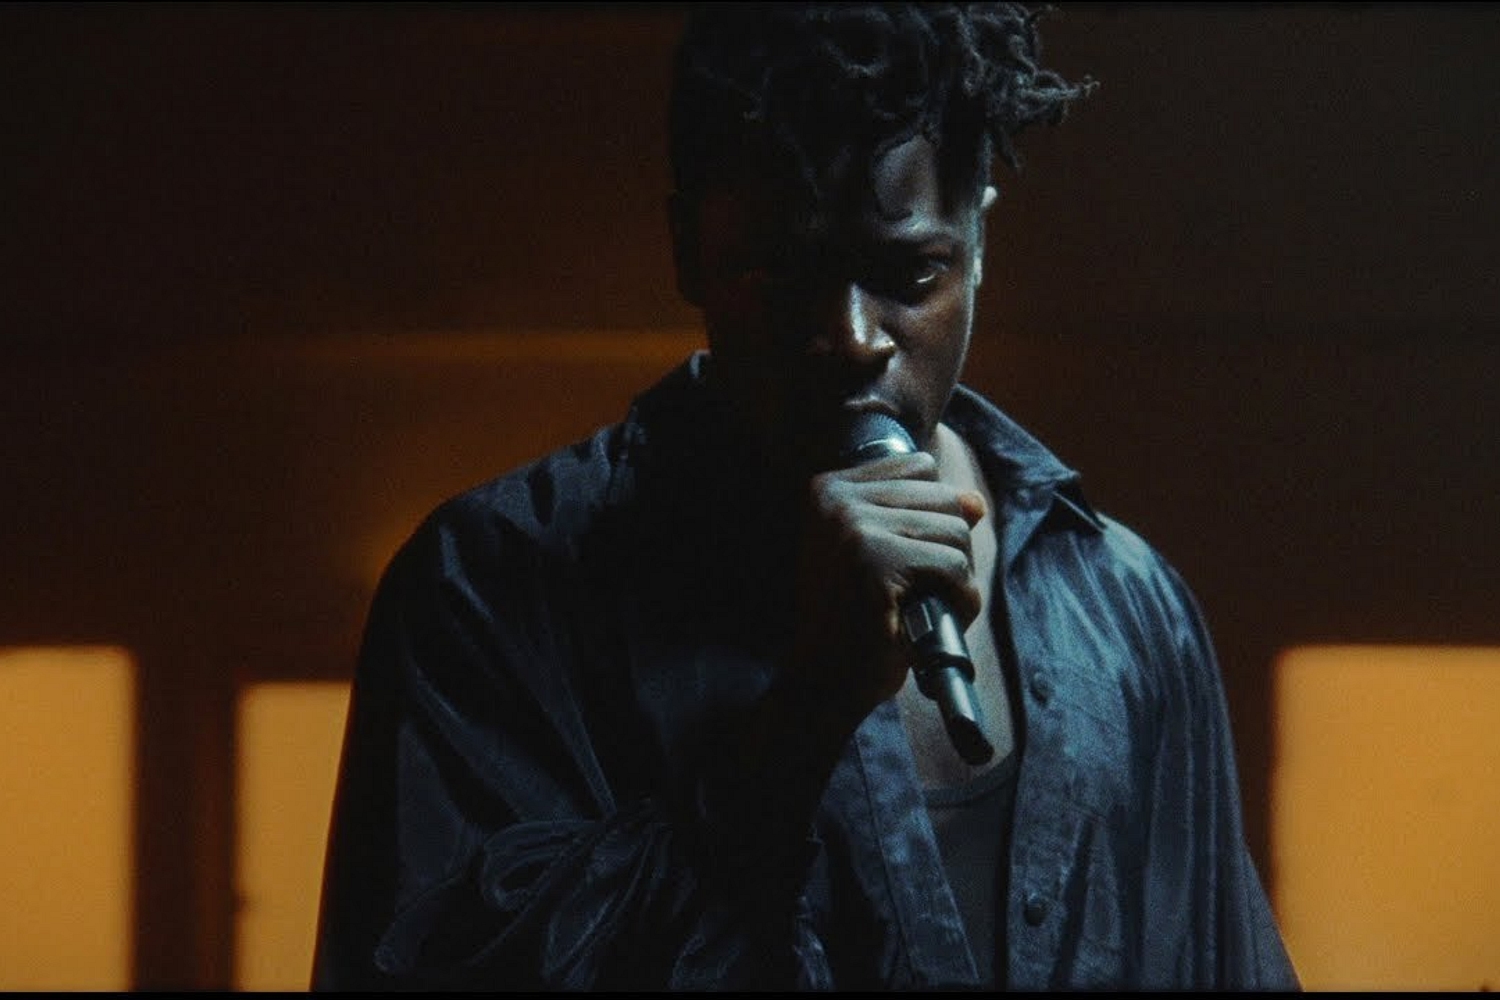 Moses Sumney shares one-take performance video of ‘Rank & File’